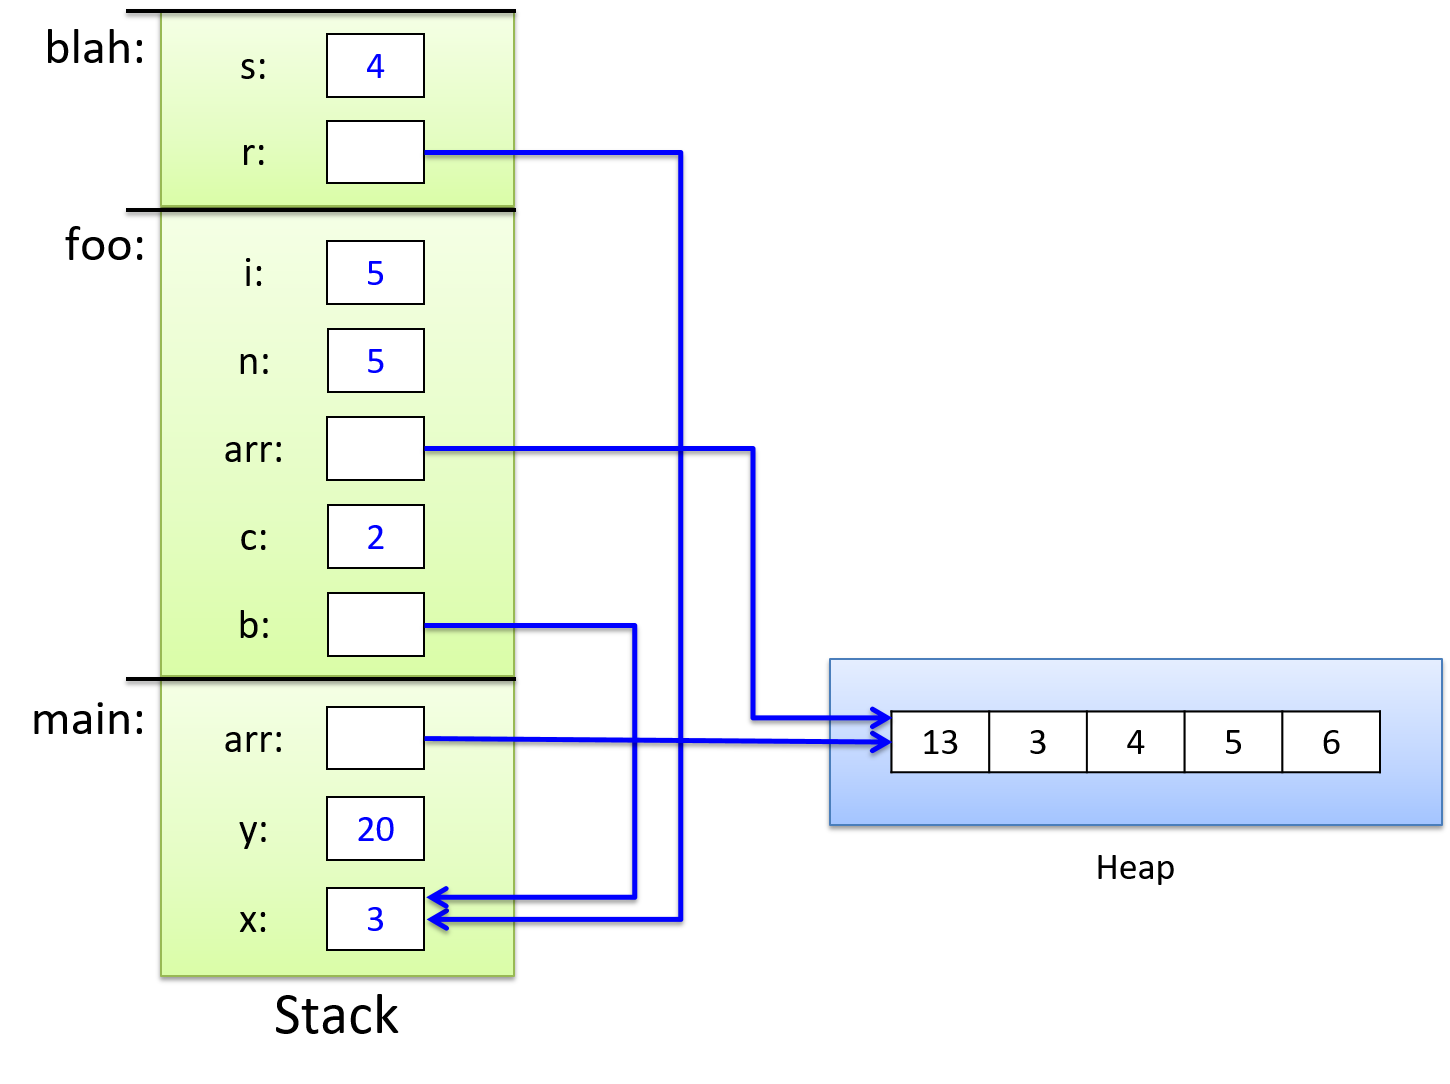 The stack frames, starting from the bottom: main, foo, and blah.  Main contains x (3), y (20), and arr (a pointer to an array on the heap containing 13, 3, 4, 5, and 6).  Foo contains i (5), n (5), arr (a pointer to the same array on the heap), c (2), and b (a pointer to x in main’s stack frame).  Blah contains s (4), and r (another pointer to x in main’s stack frame).